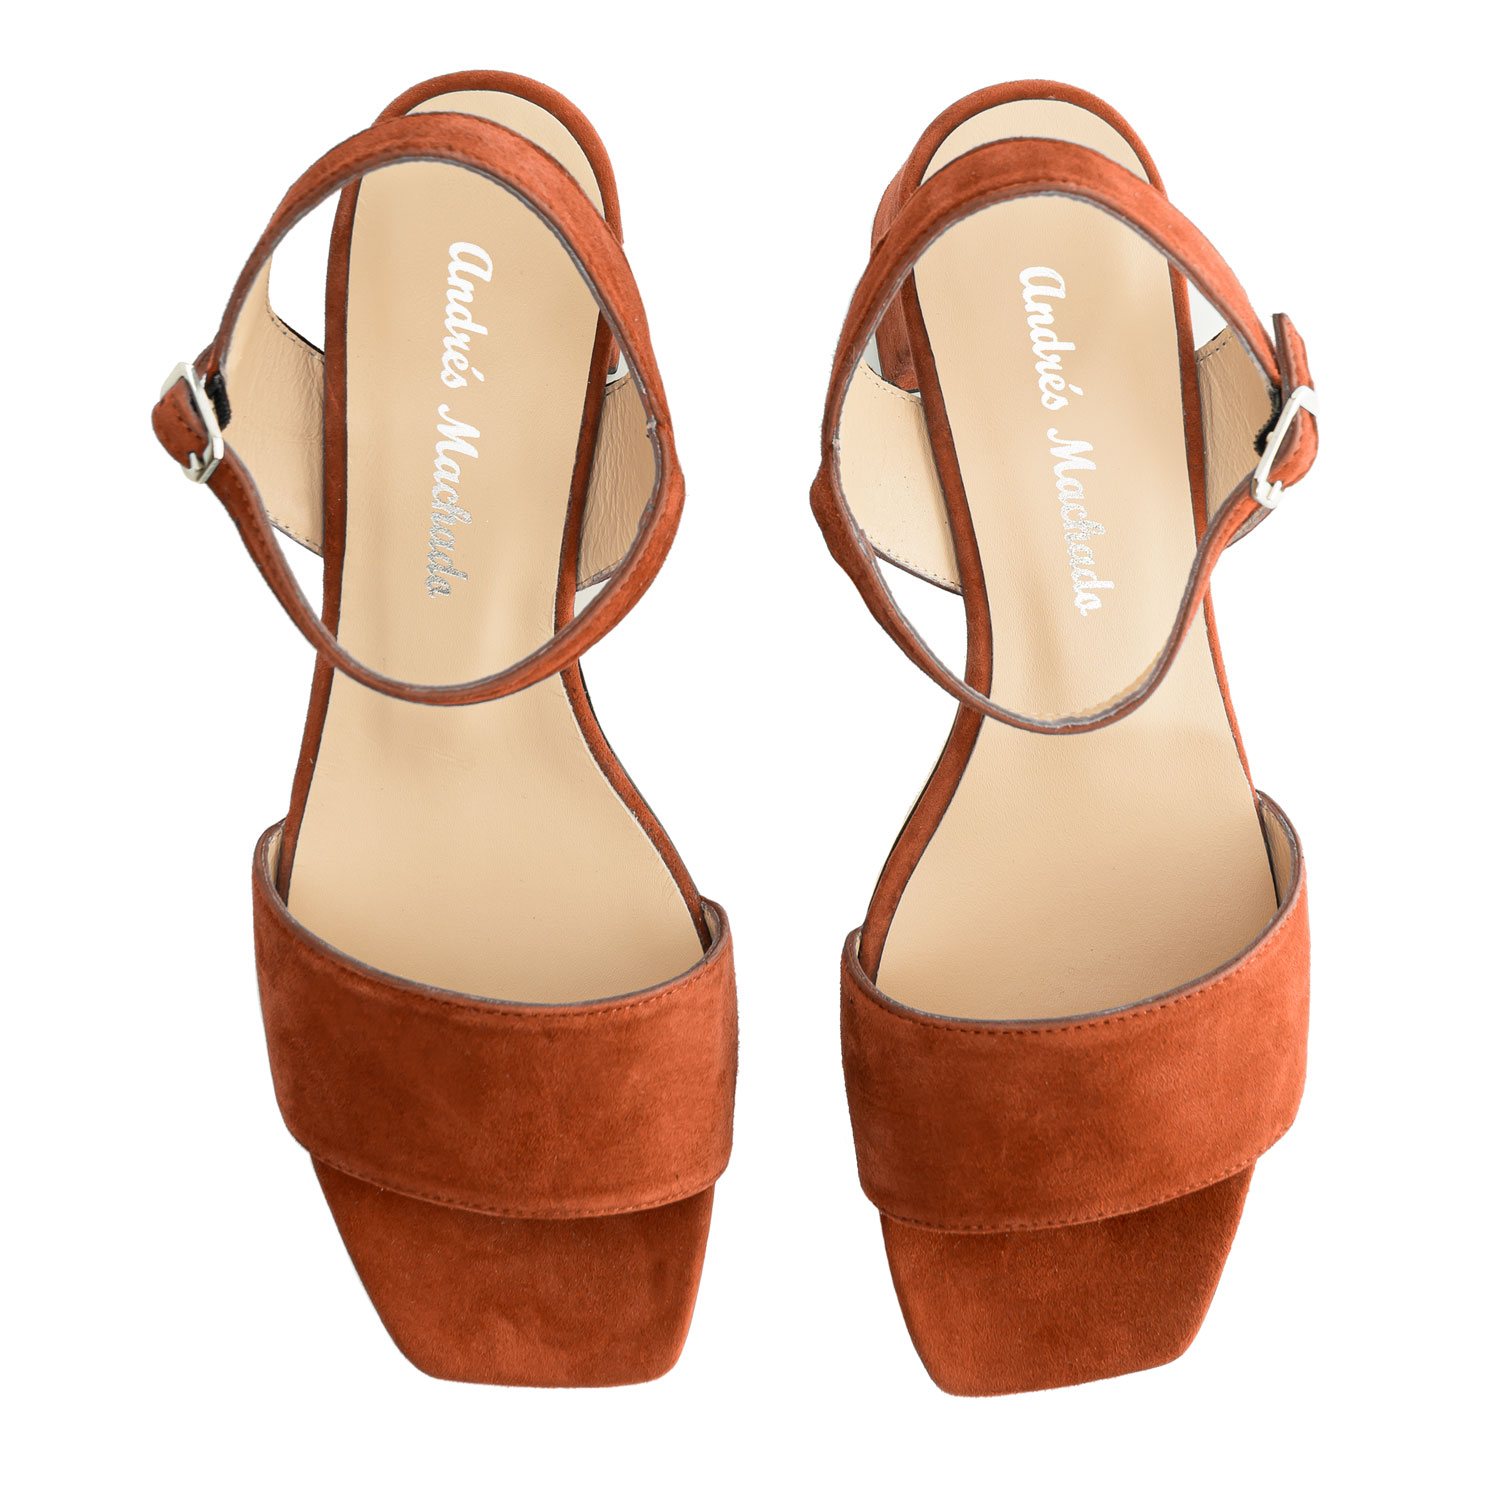 Block-heeled Sandals in Brick Red Suede Leather 